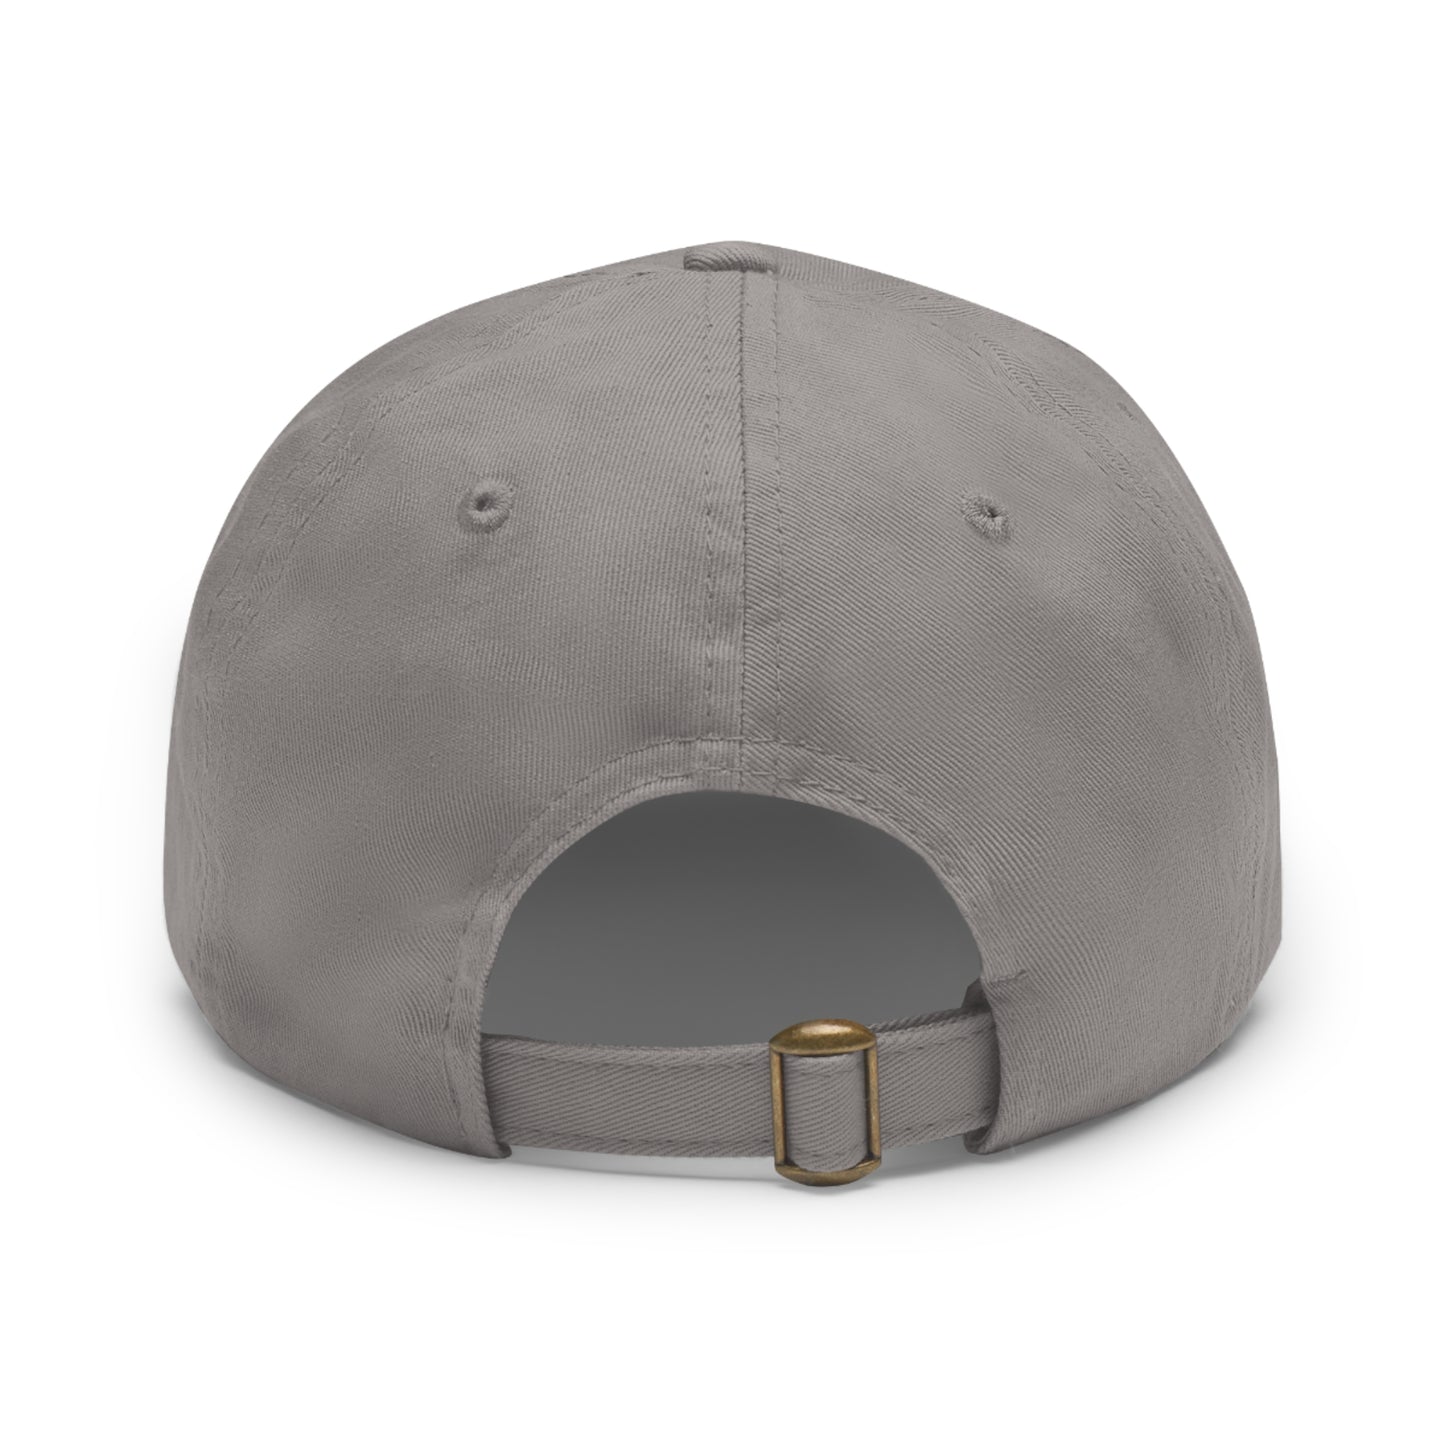 INSPIRED HWWF Dad Hat with Leather Patch